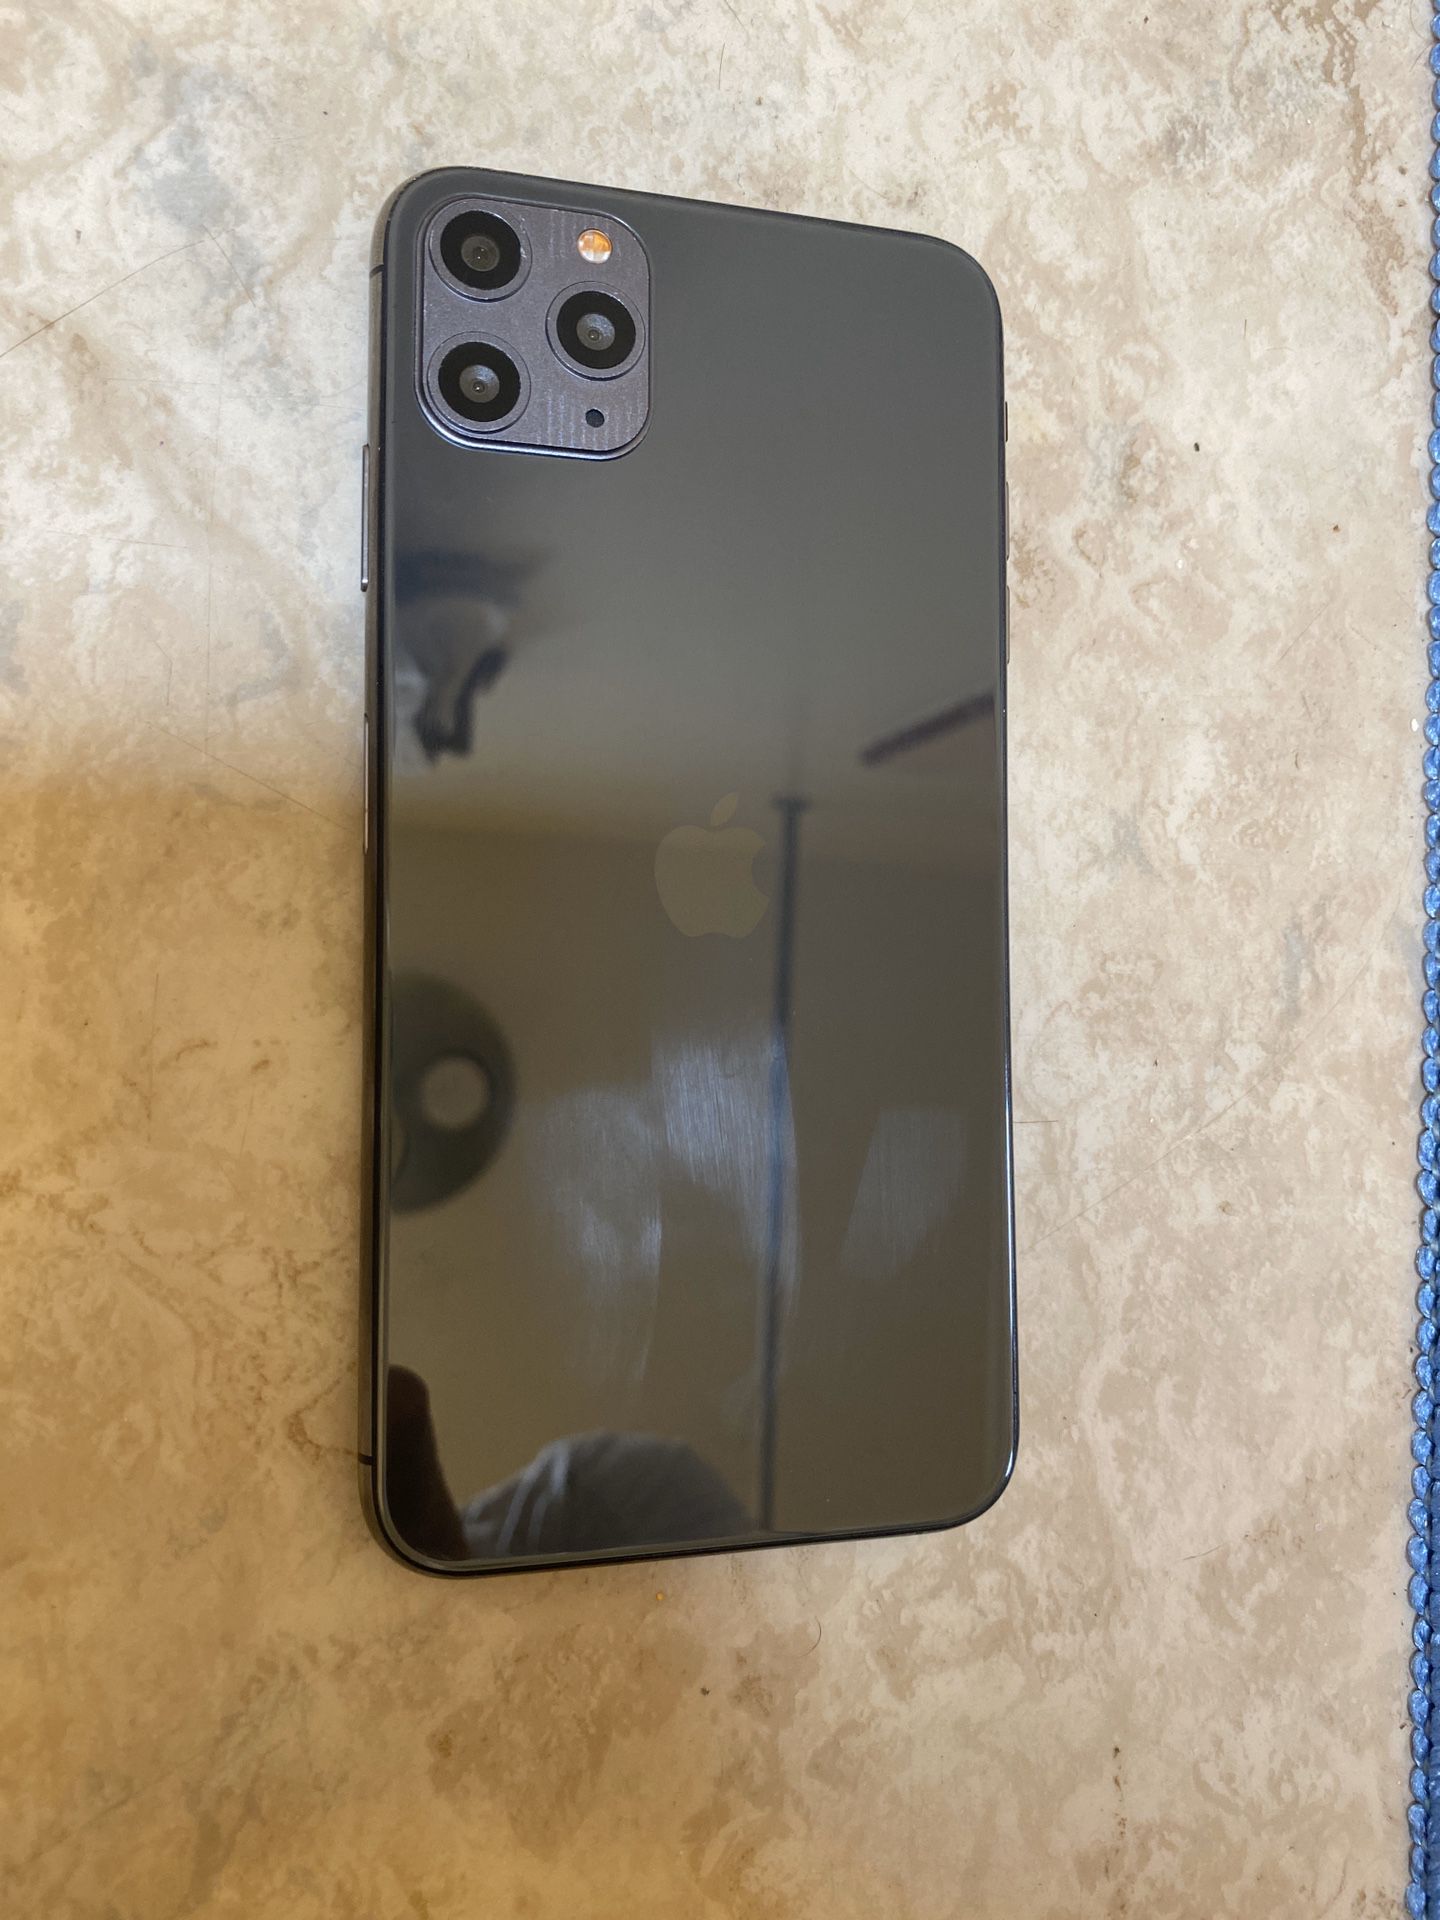 Fake iPhone 11 pro max 512 gb unlocked Android based